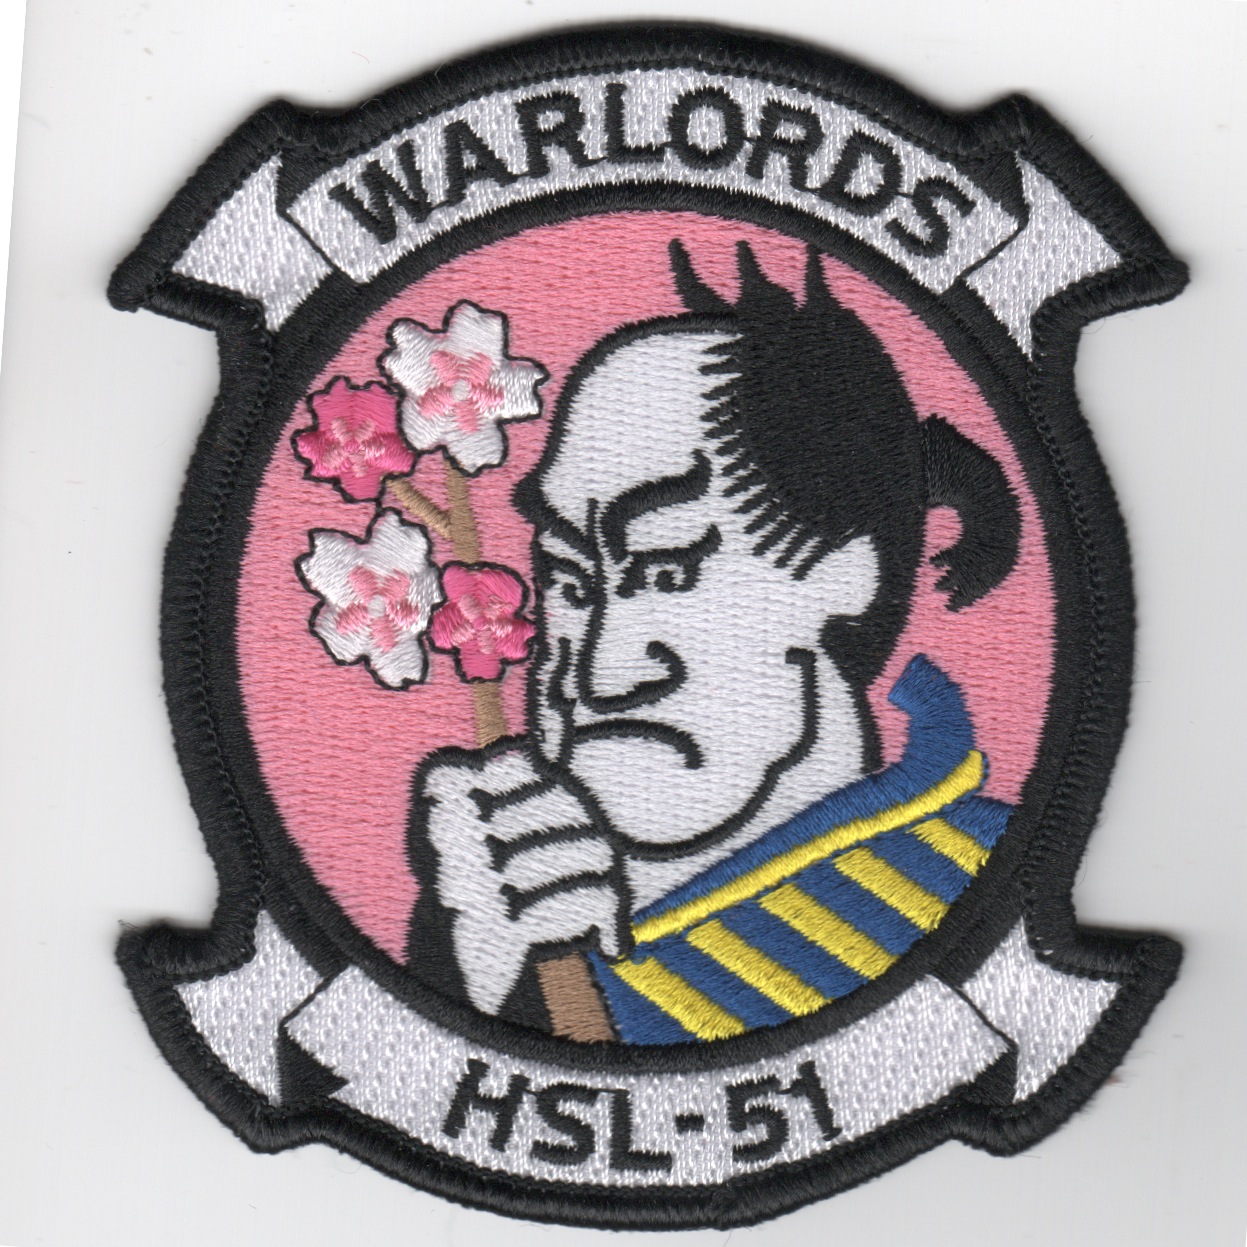 HSL-51 'Warlords' Squadron Patch (Pink)